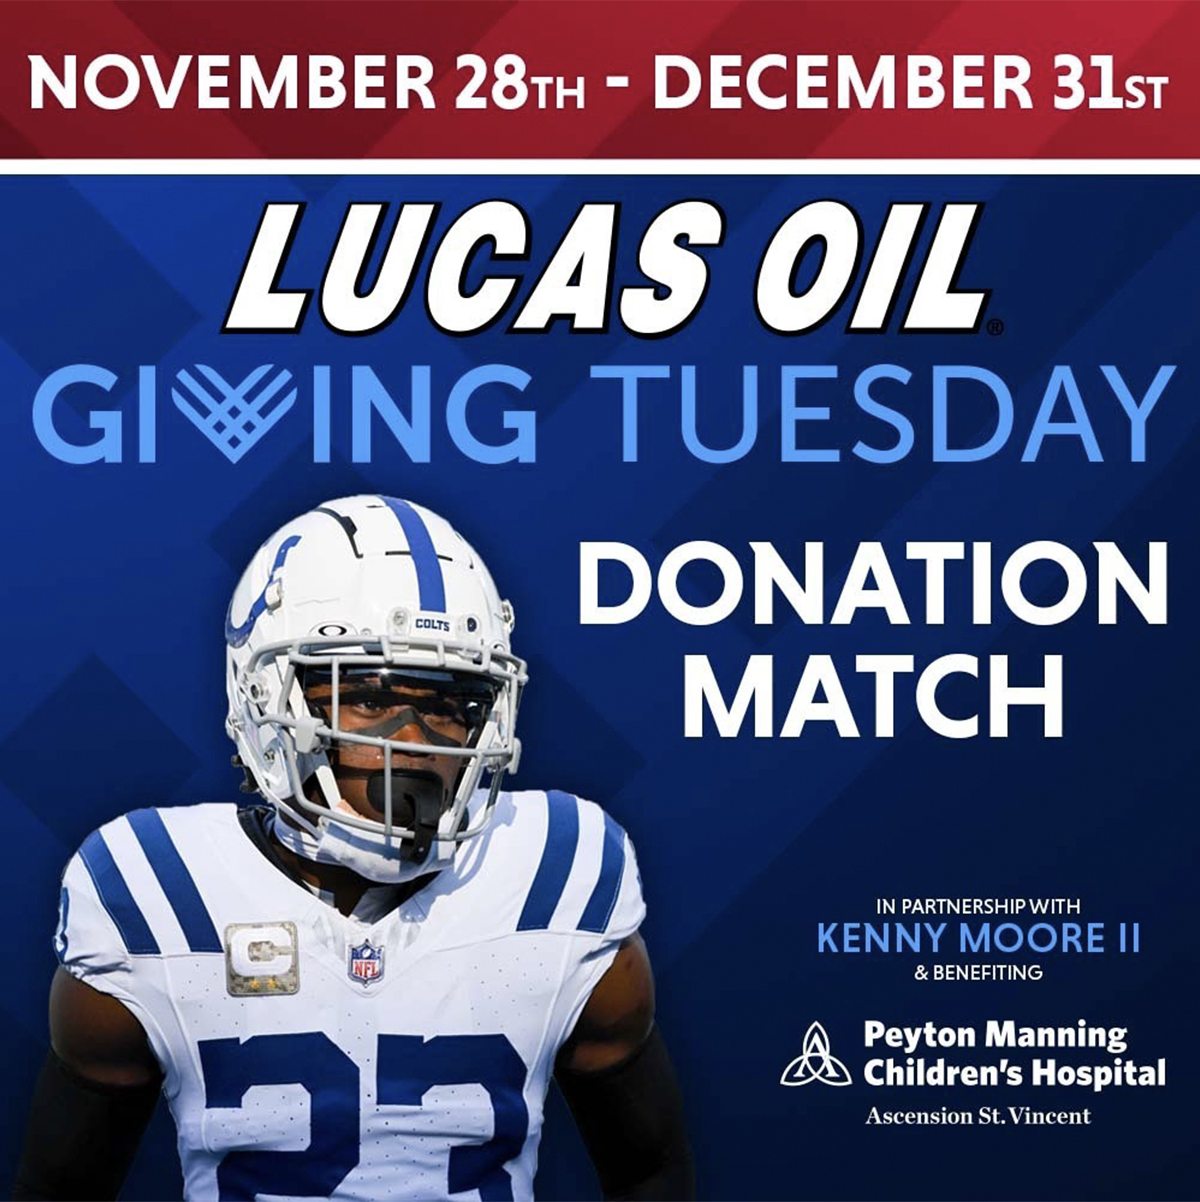 Lucas Oil Giving Tuesday Donation Match